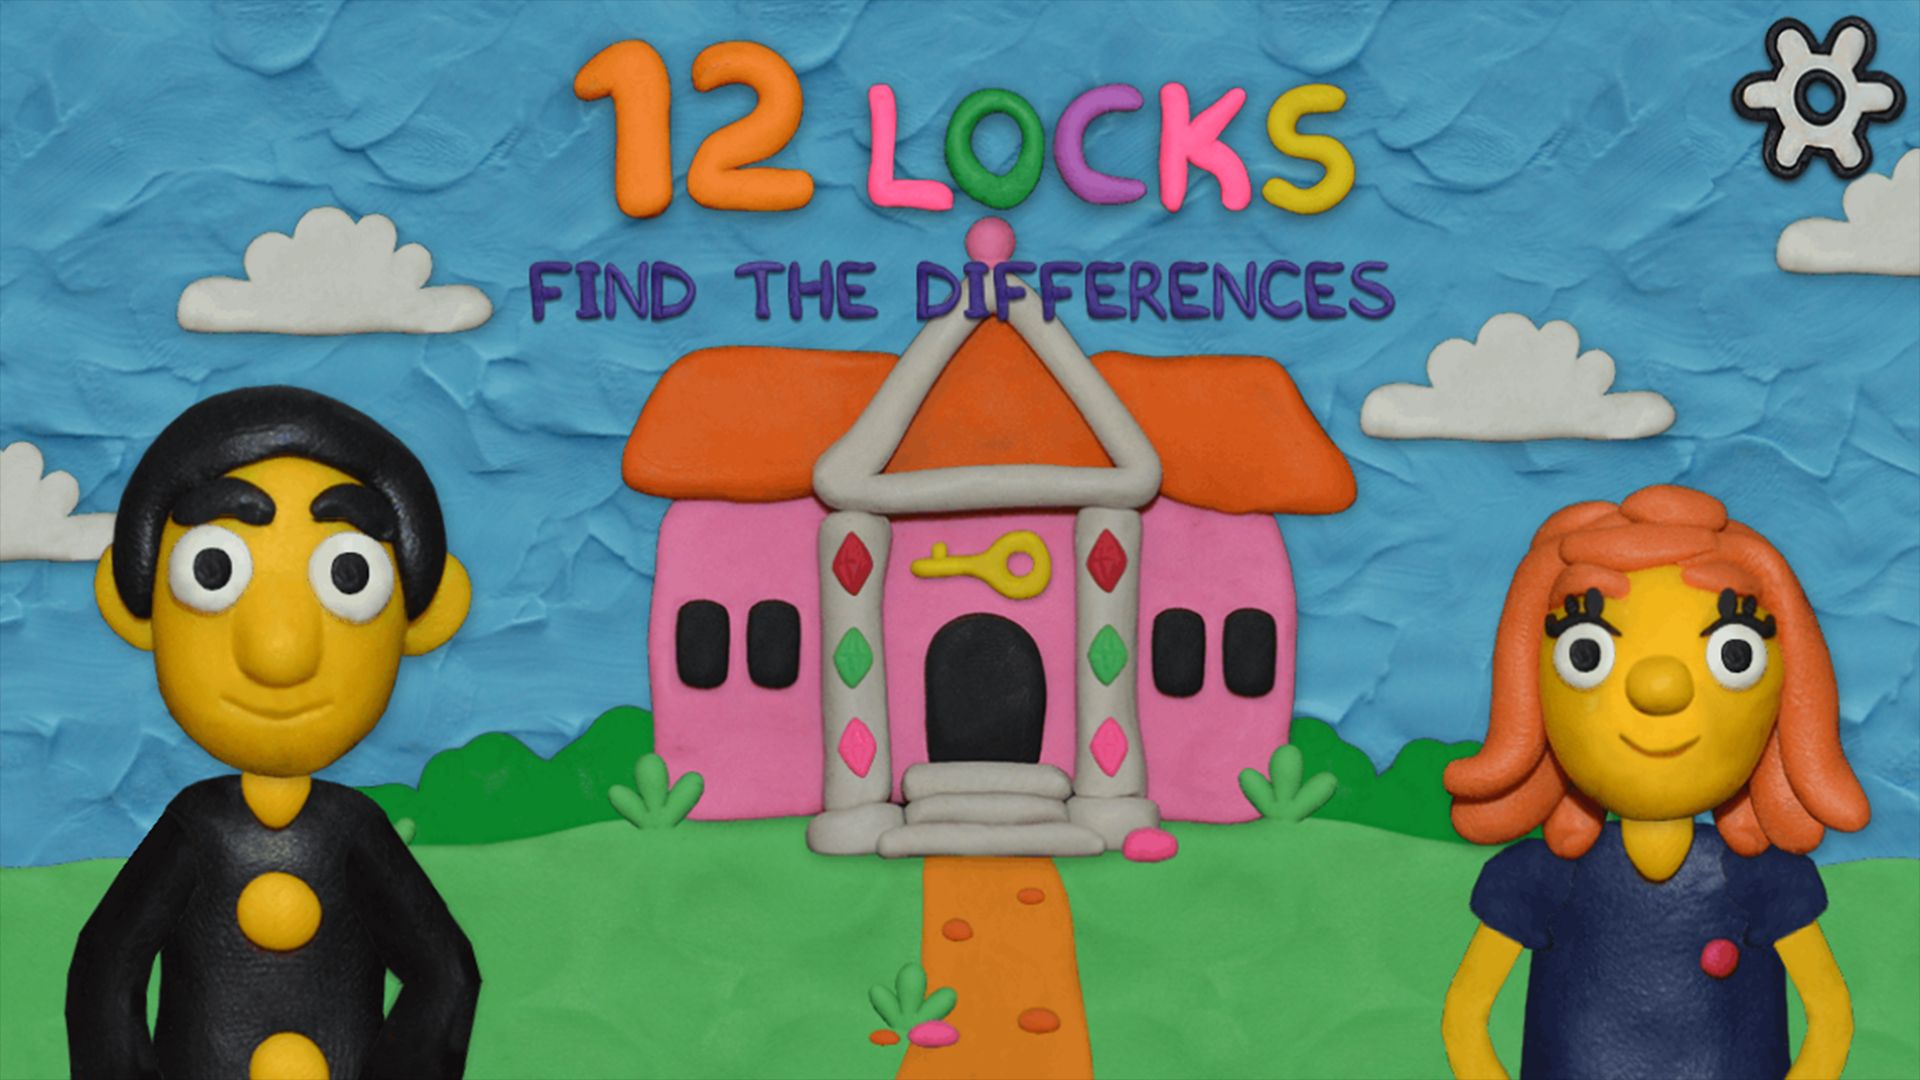 Scarica 12 Locks Find the differences gratis per Android.